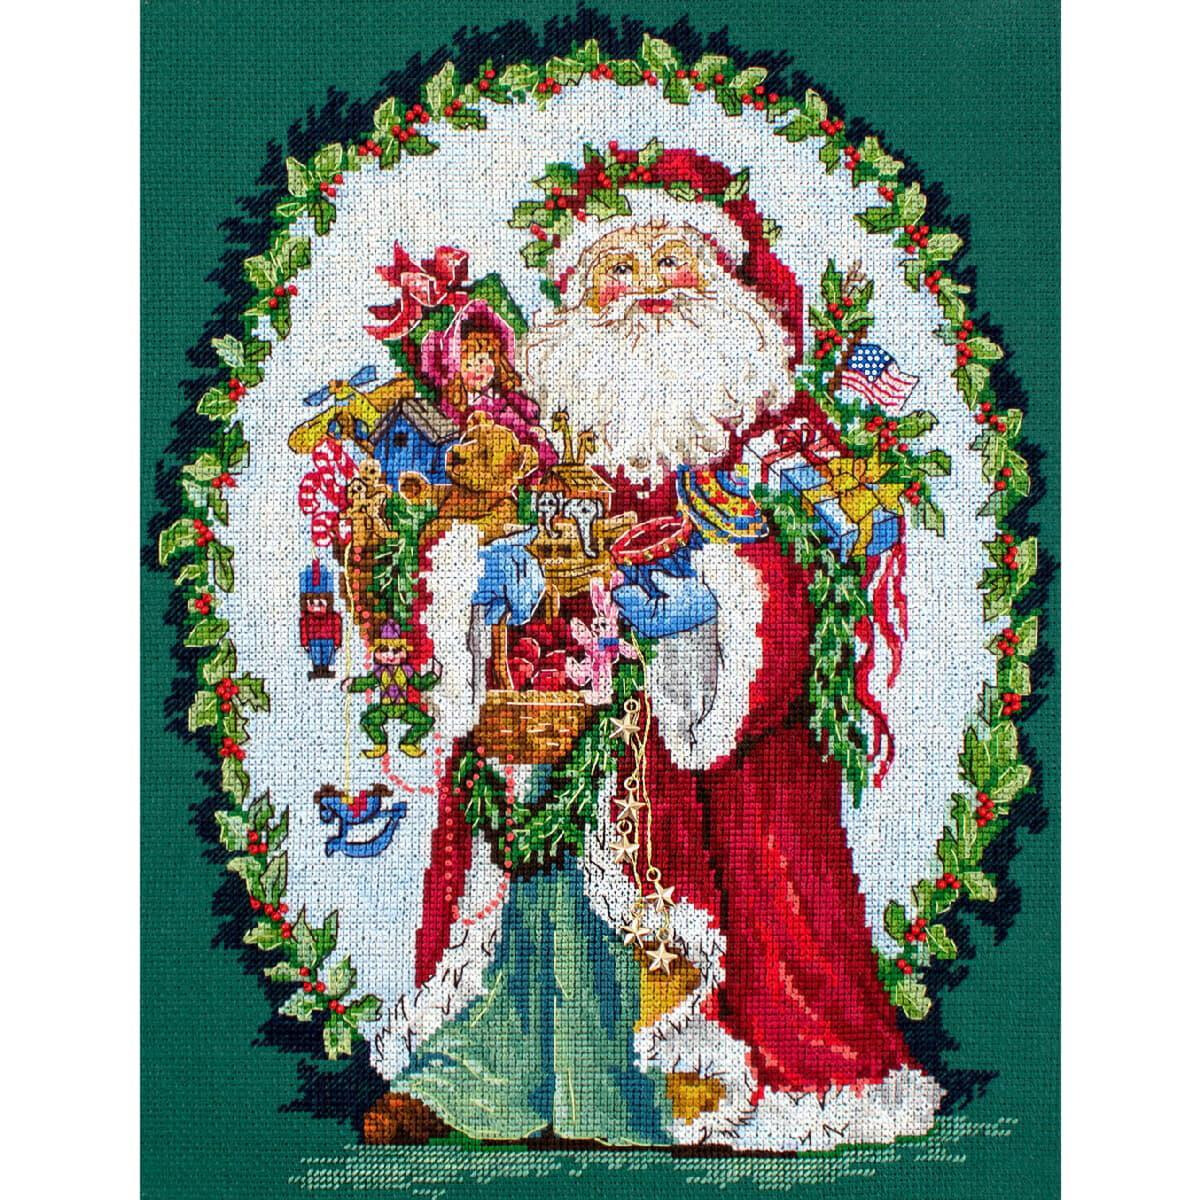 Letistitch counted cross stitch kit "Jolly Saint...